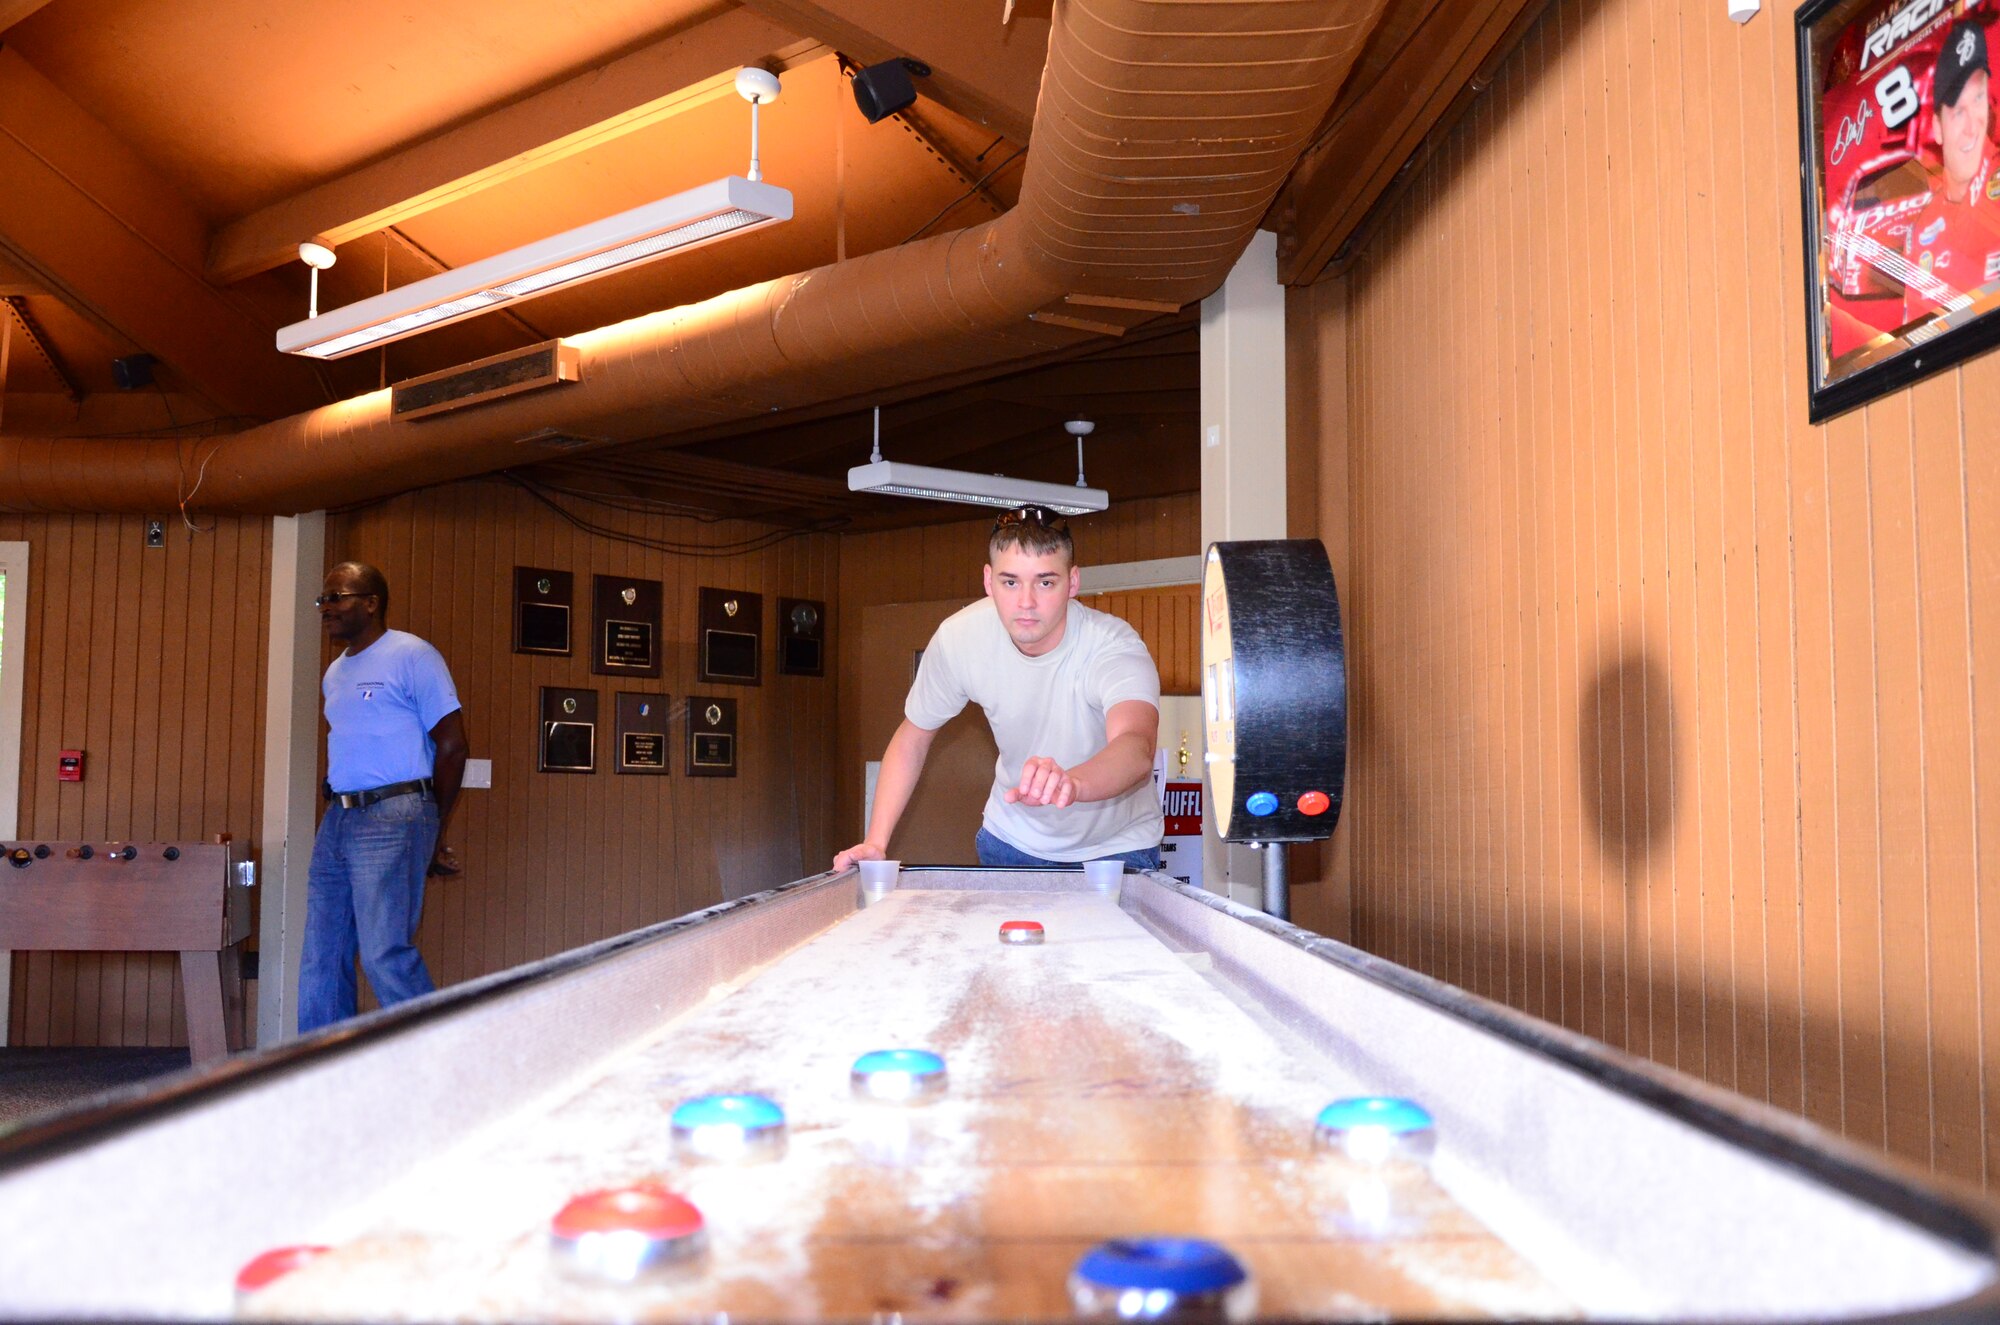 Teams compete in shuffleboard as one of 15 events at the Annual 94th Airlift Wing Team Day at Dobbins Air Reserve Base, Ga., Oct. 16. Team day is designed to promote team work and competitive spirit between units. (U.S. Air Force photo/ Senior Airman Elizabeth Van Patten)